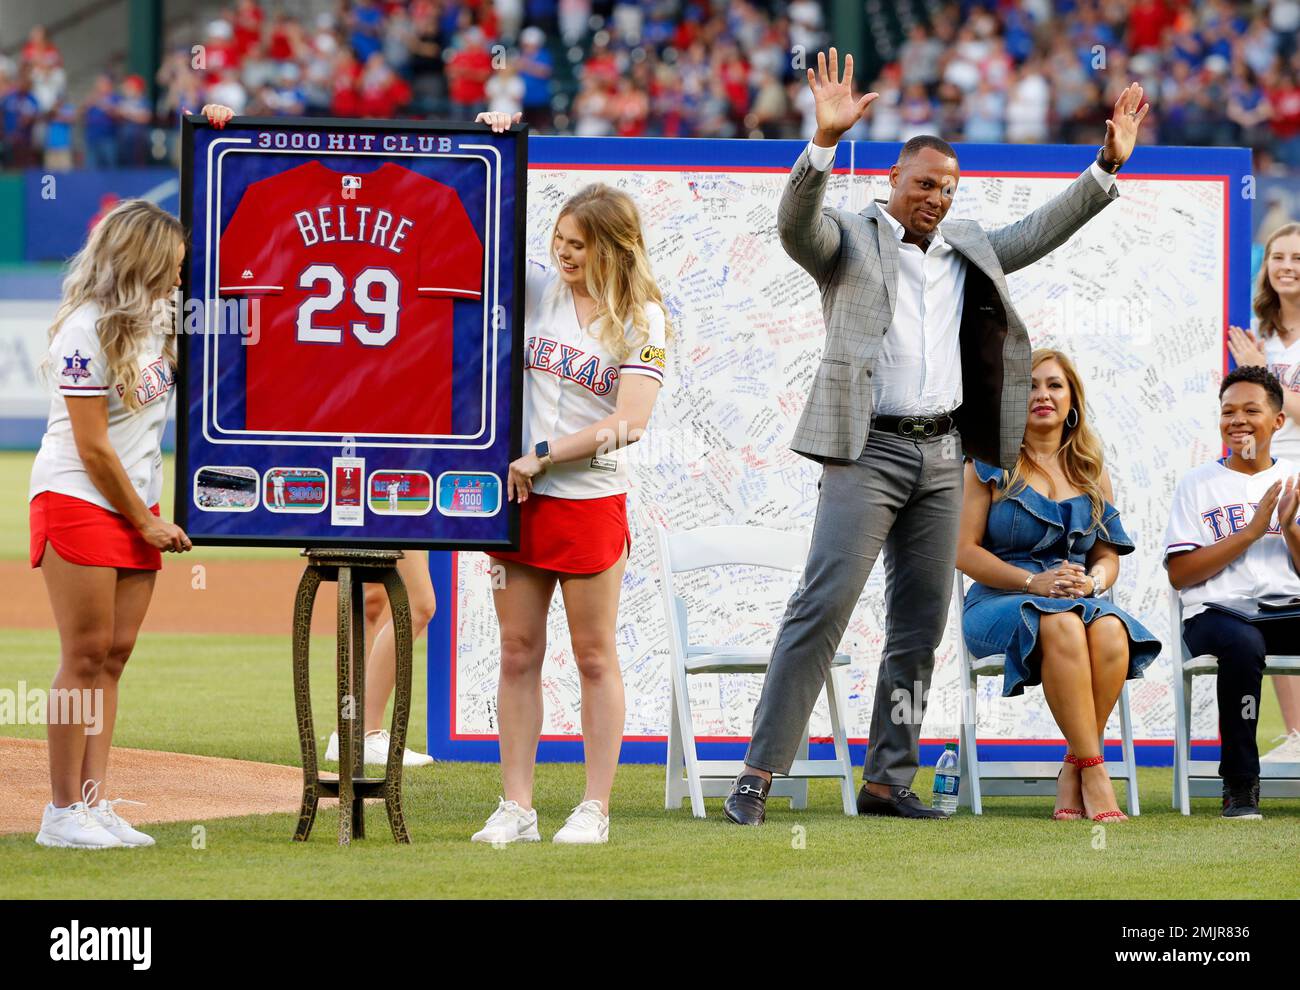 Retired player Adrian Beltre, from left, his wife Sandra, son